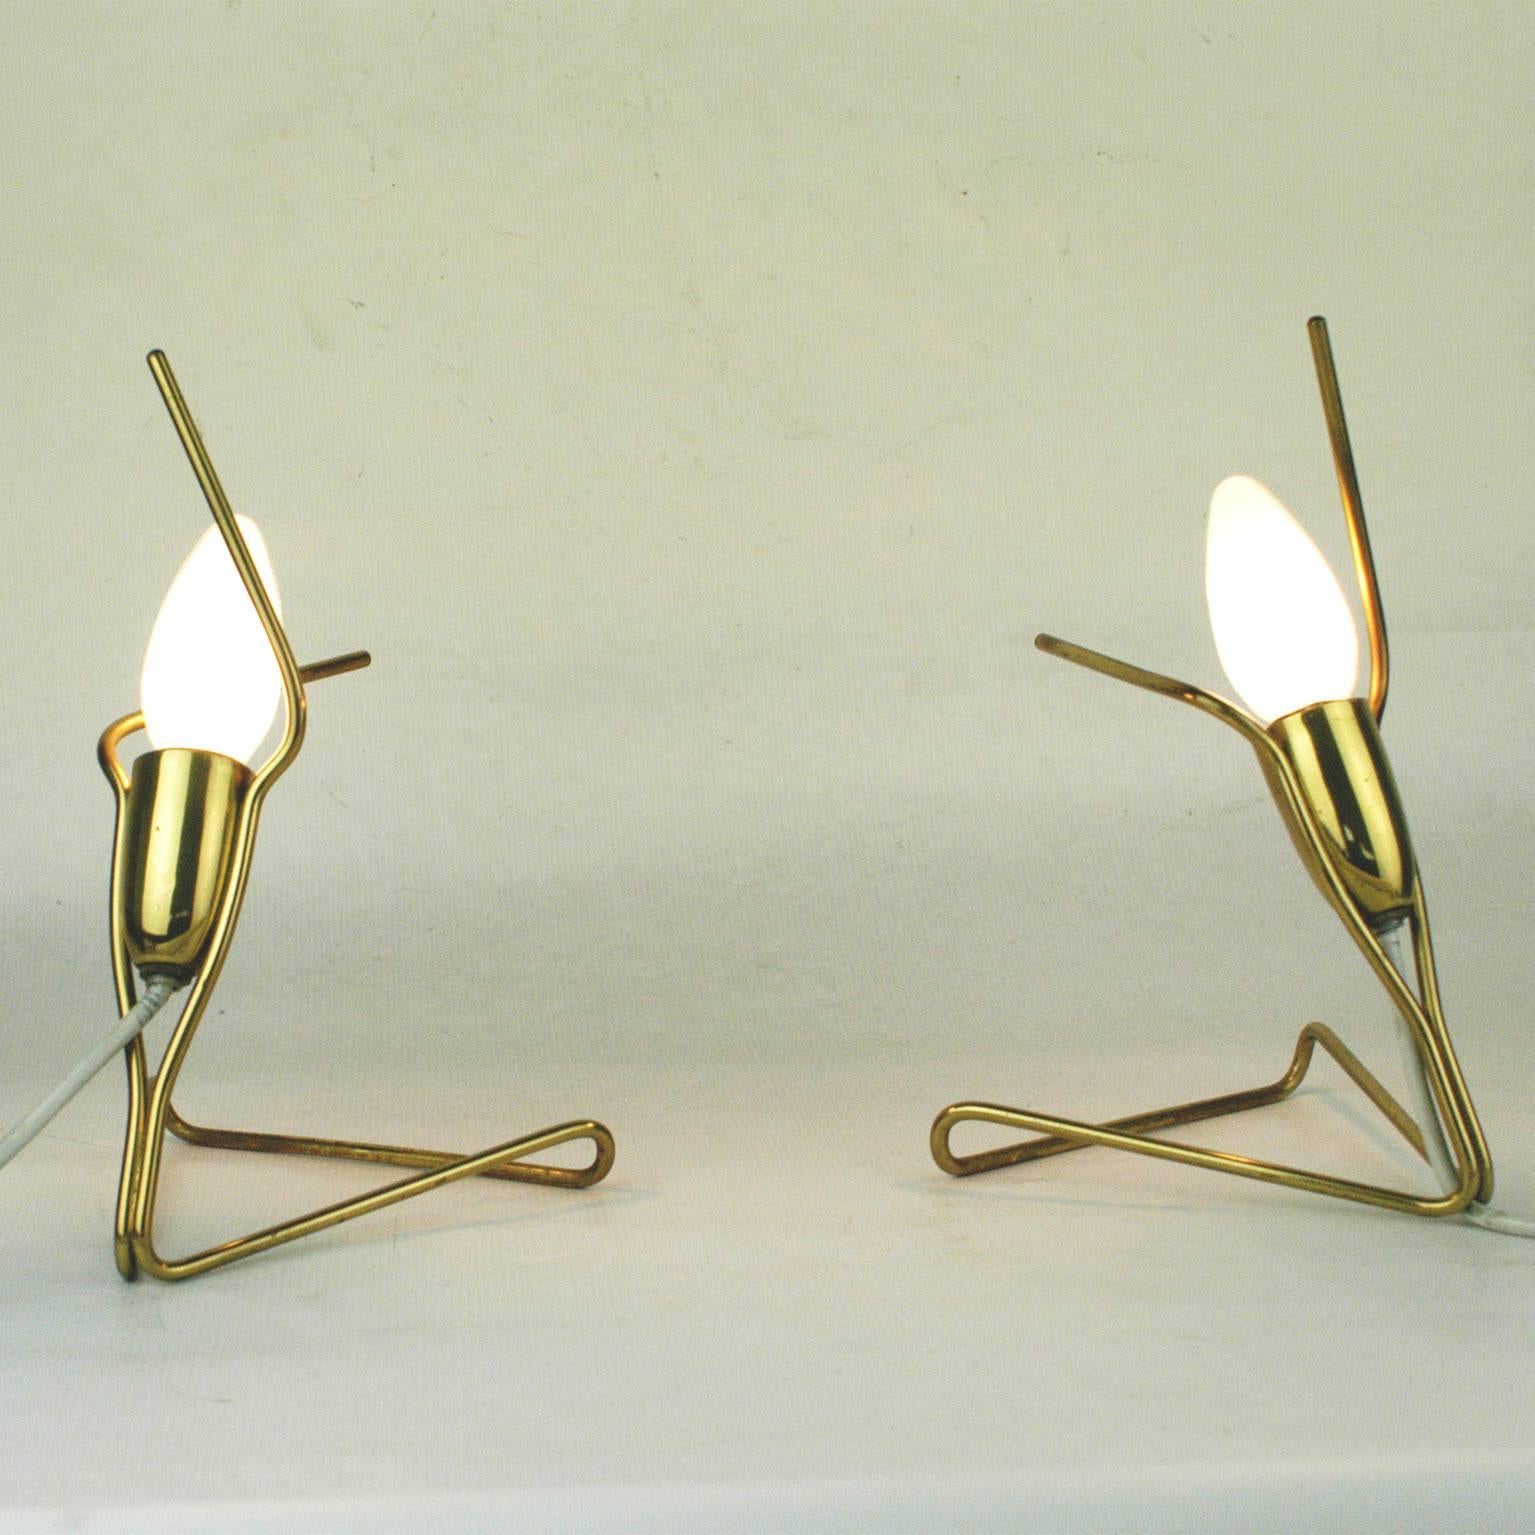 Pair of Austrian Midcentury Brass Wall or Table Lamps by Rupert Nikoll (Mitte des 20. Jahrhunderts)